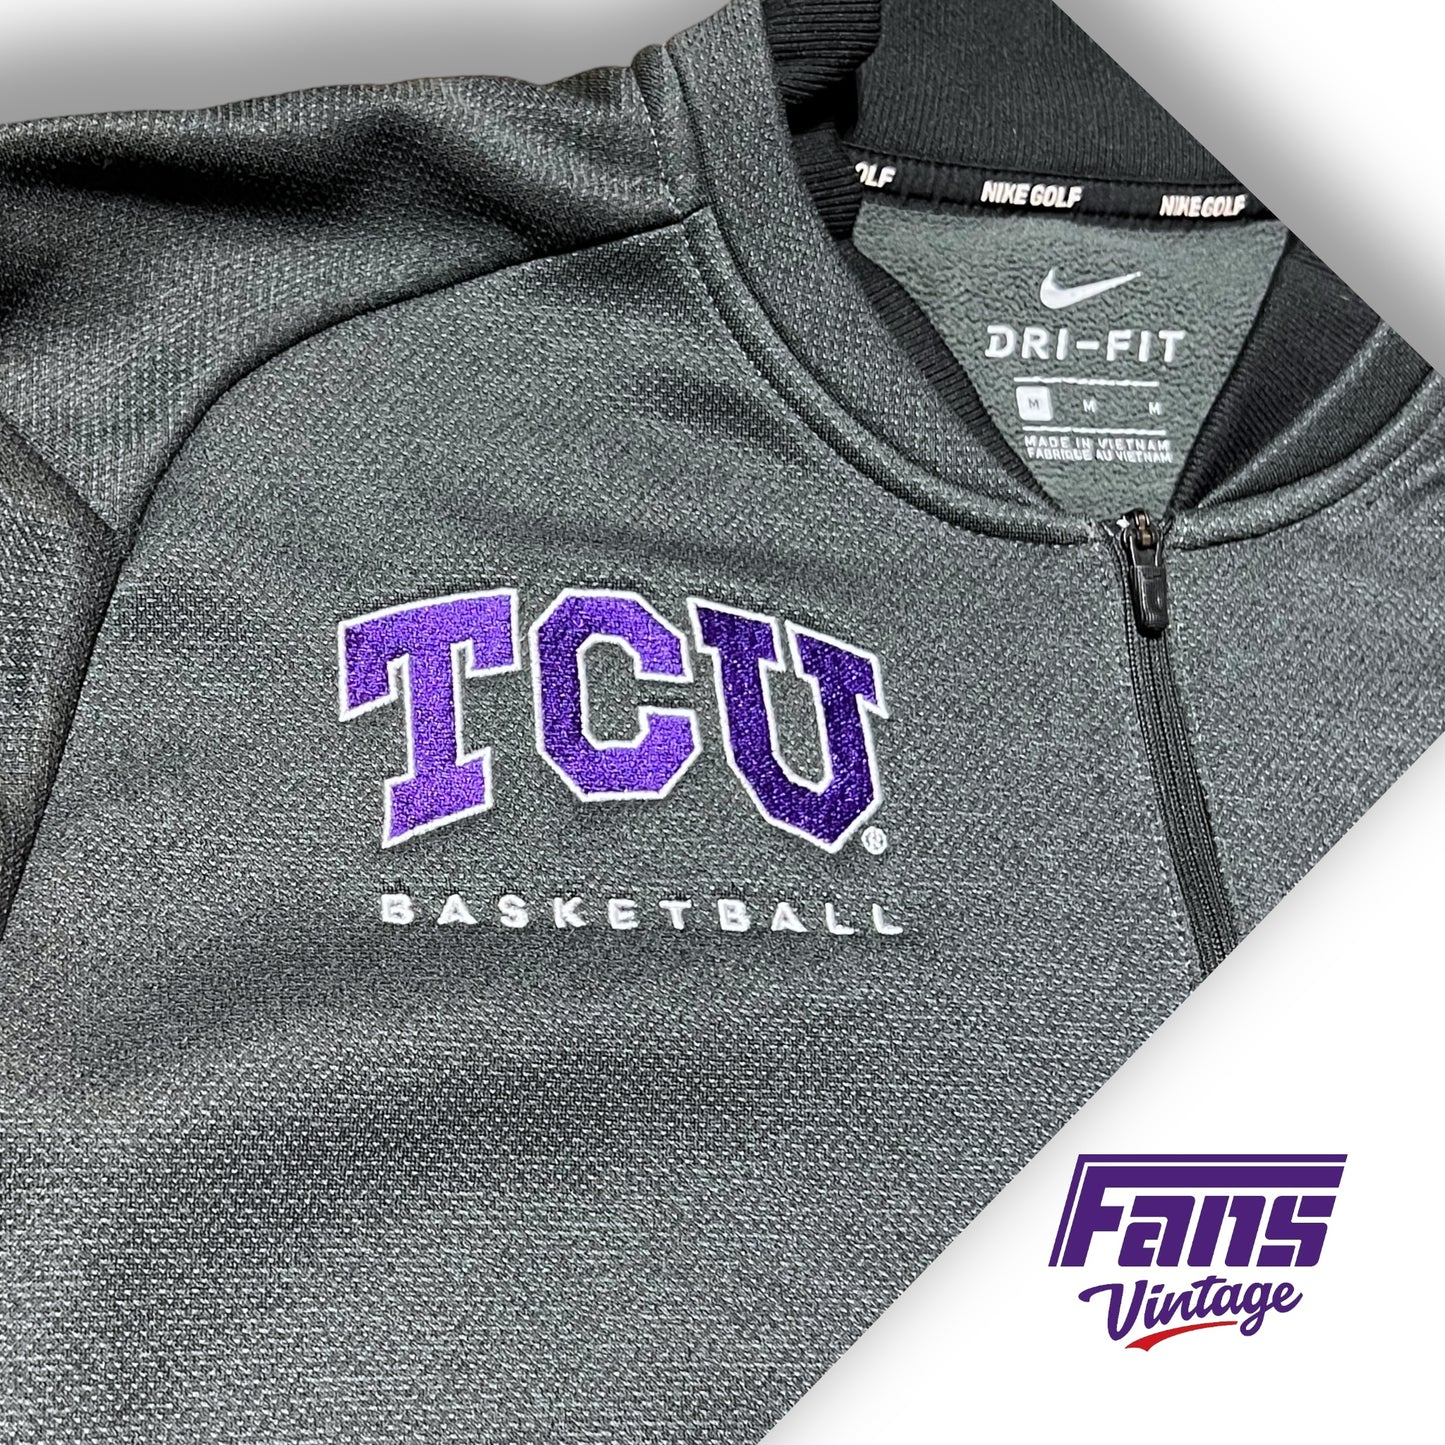 TCU Basketball Coach Exclusive Premium Nike Quarter Zip Pullover - Awesome Details!